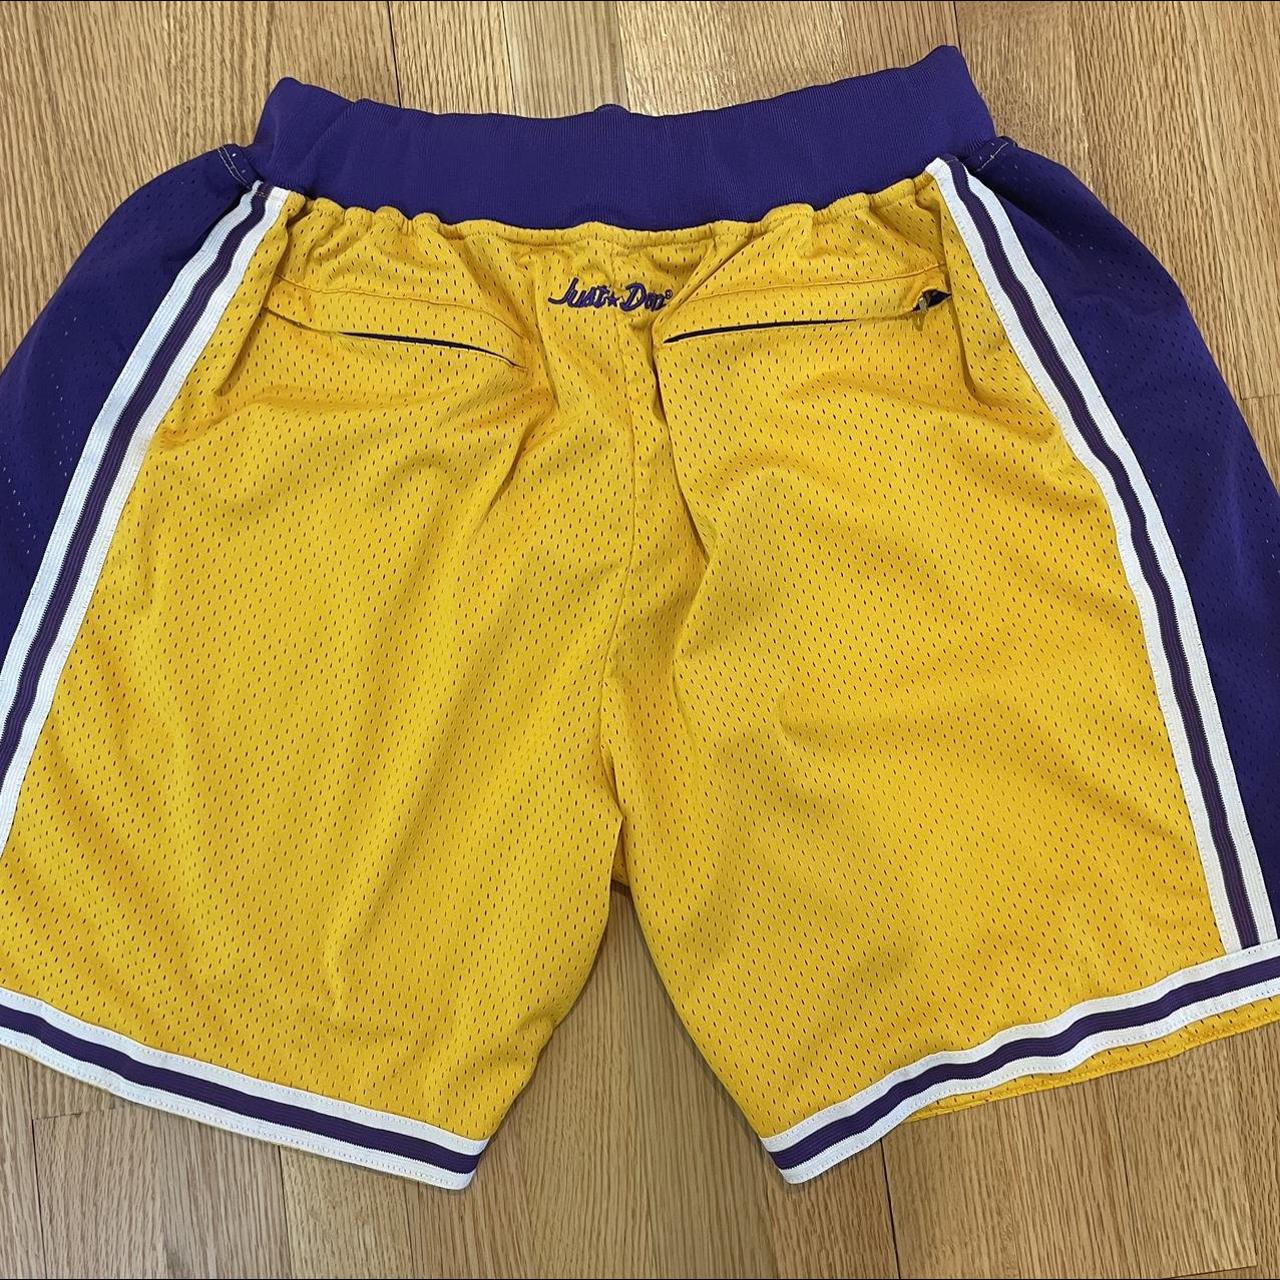 Just Don Los Angeles Lakers Purple Away Shorts SOLD OUT!!! for